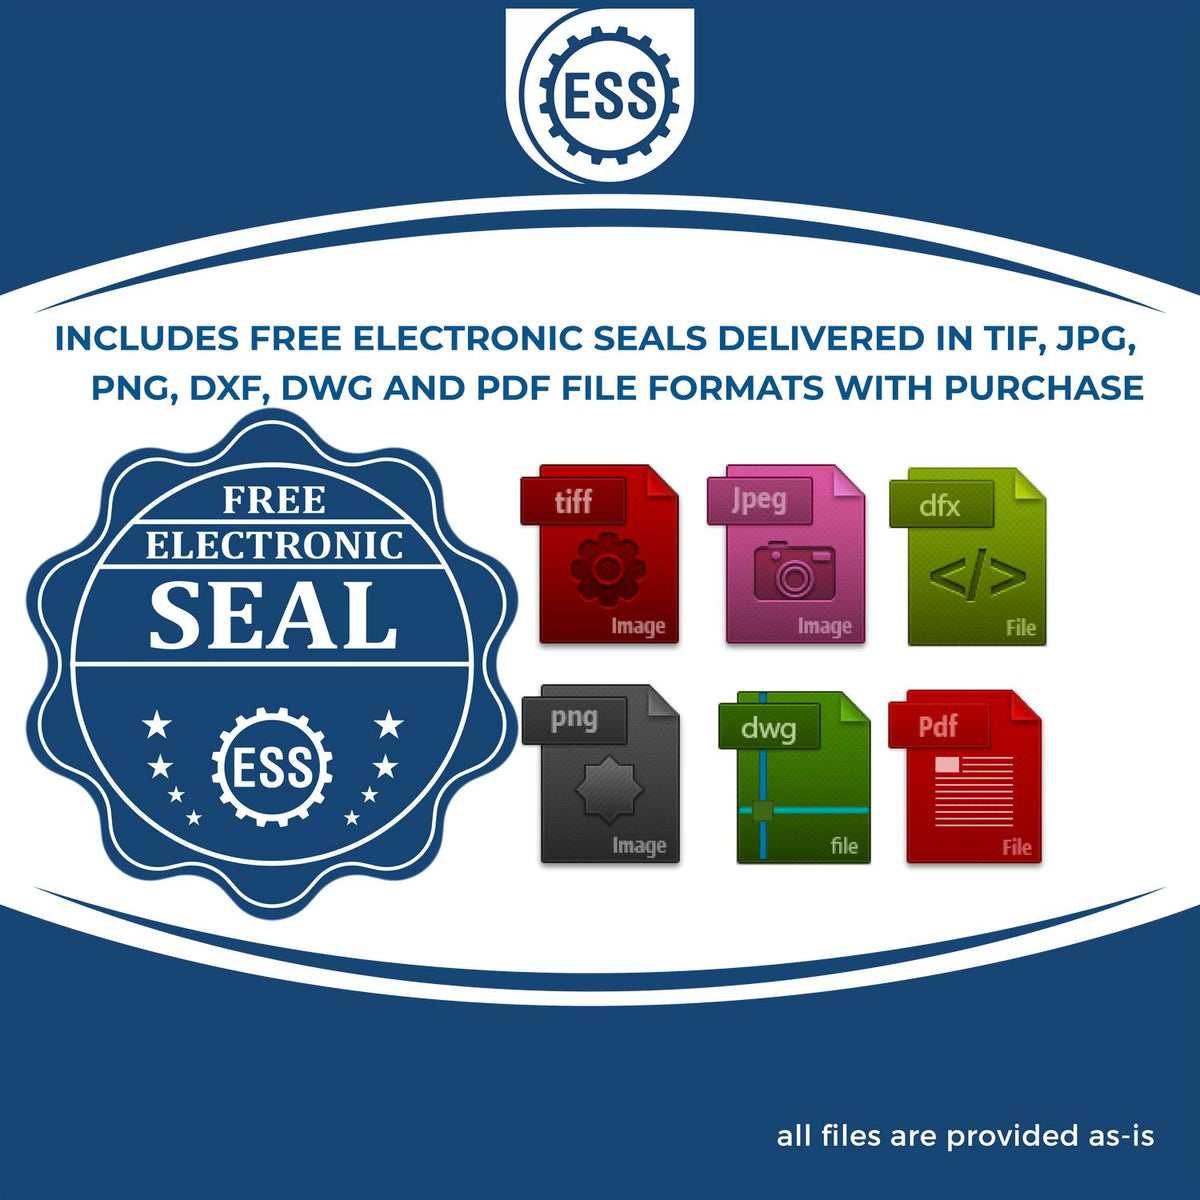 An infographic for the free electronic seal for the Long Reach Nevada PE Seal illustrating the different file type icons such as DXF, DWG, TIF, JPG and PNG.